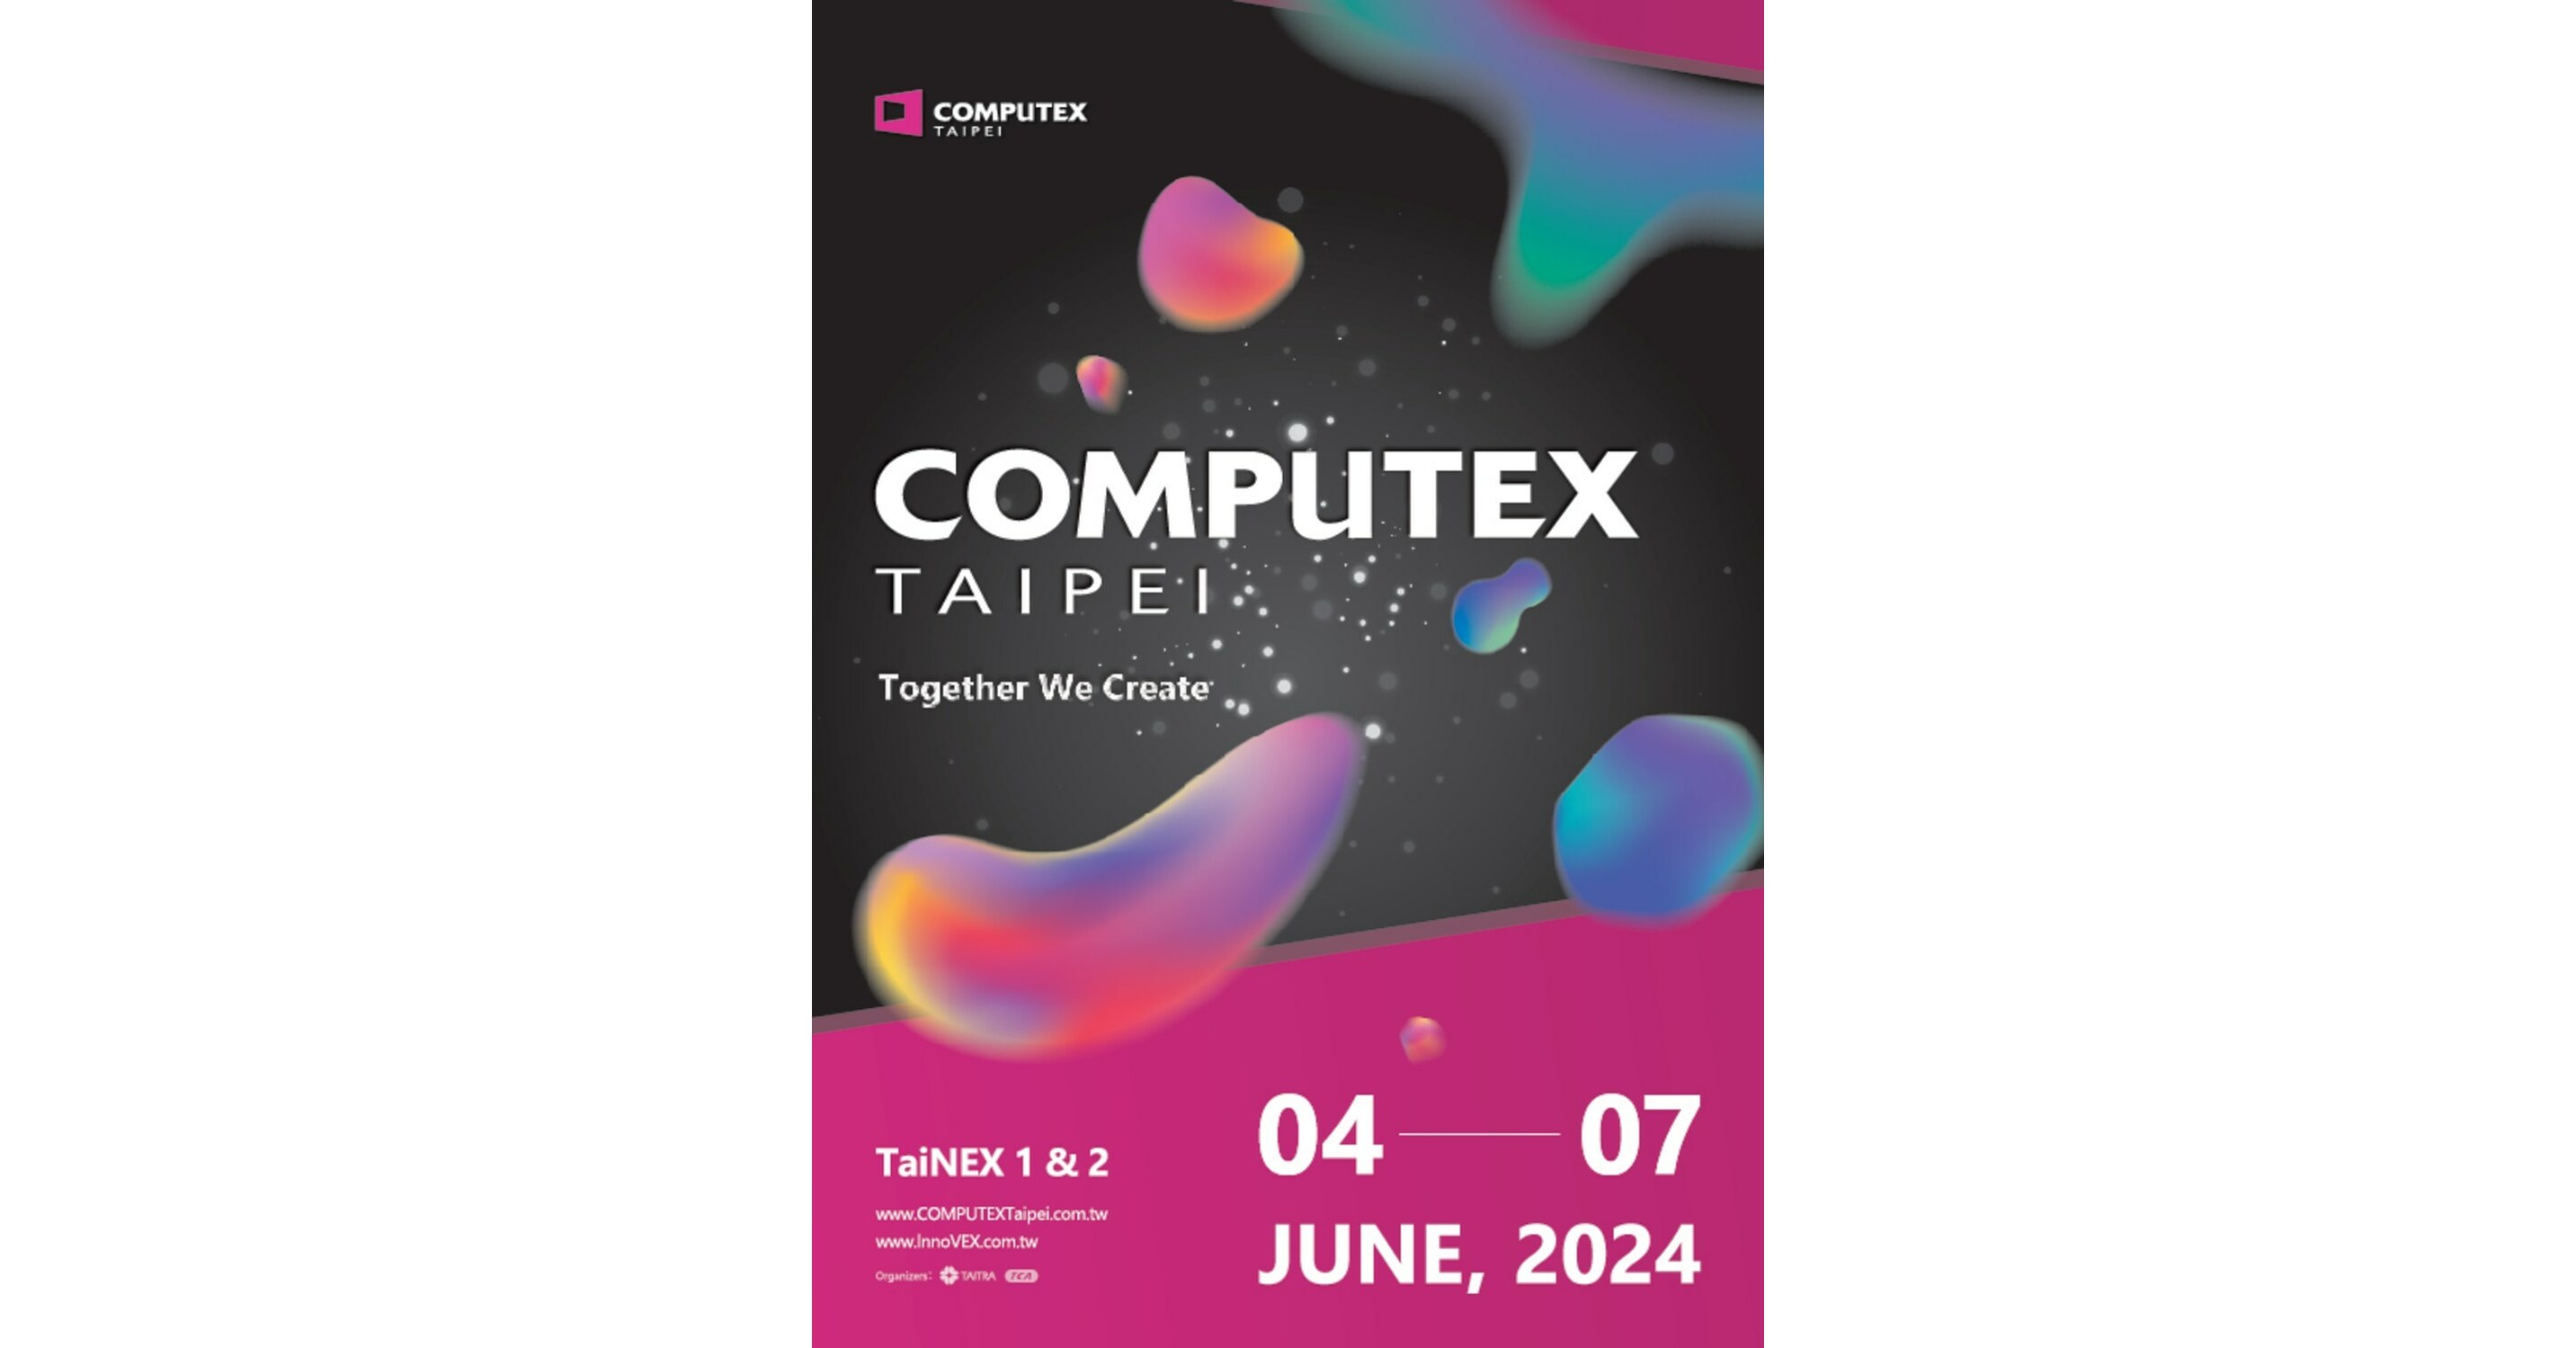 COMPUTEX 2024 Global AI Focus, Open for Registration Oct 17, 2023